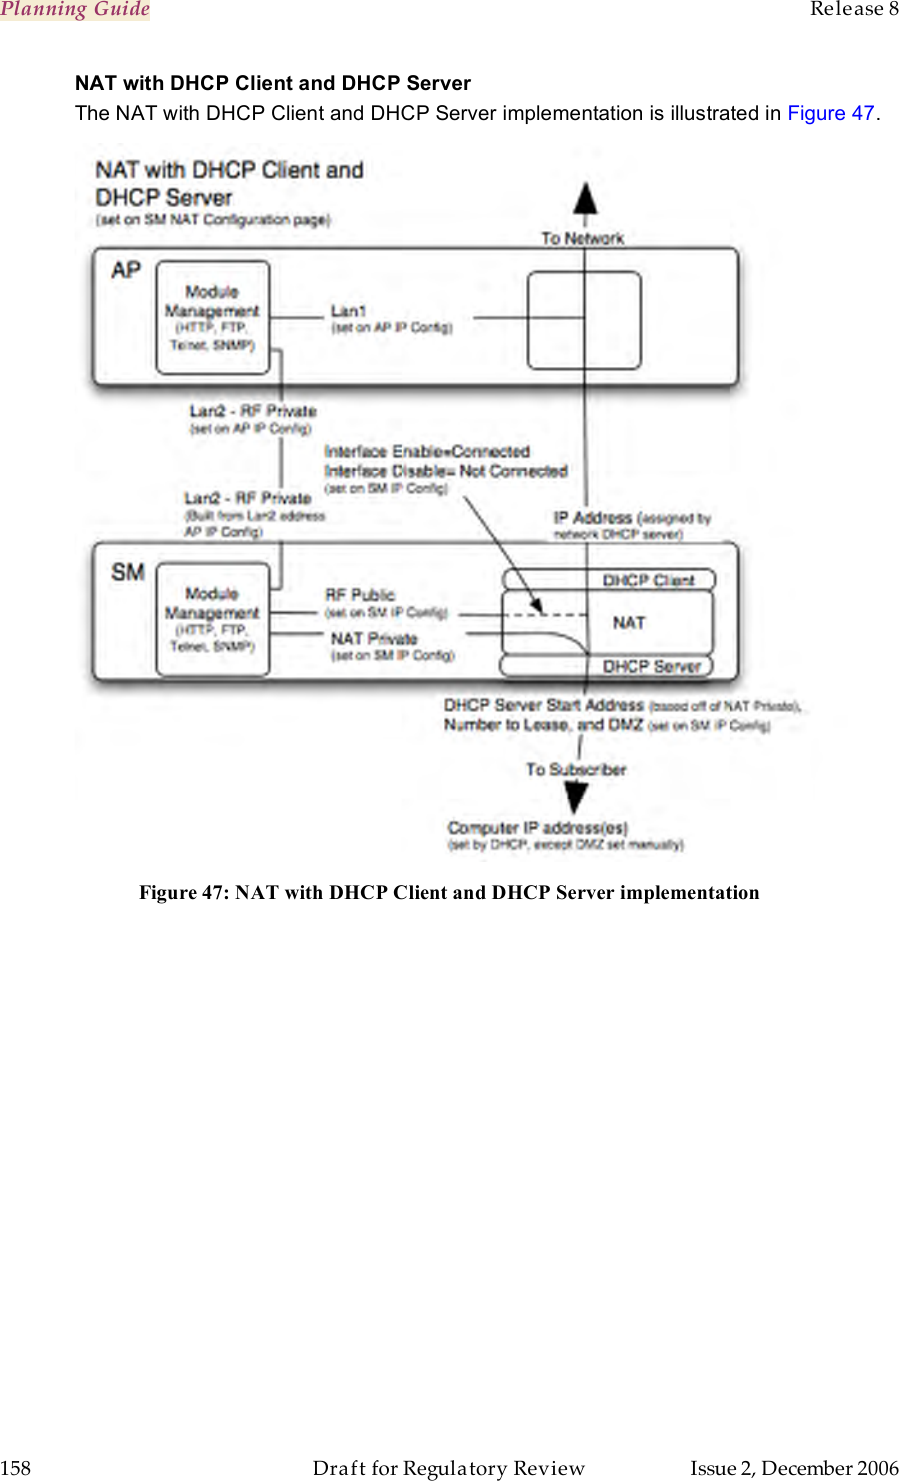 Planning Guide    Release 8   158  Draft for Regulatory Review  Issue 2, December 2006 NAT with DHCP Client and DHCP Server The NAT with DHCP Client and DHCP Server implementation is illustrated in Figure 47.  Figure 47: NAT with DHCP Client and DHCP Server implementation 